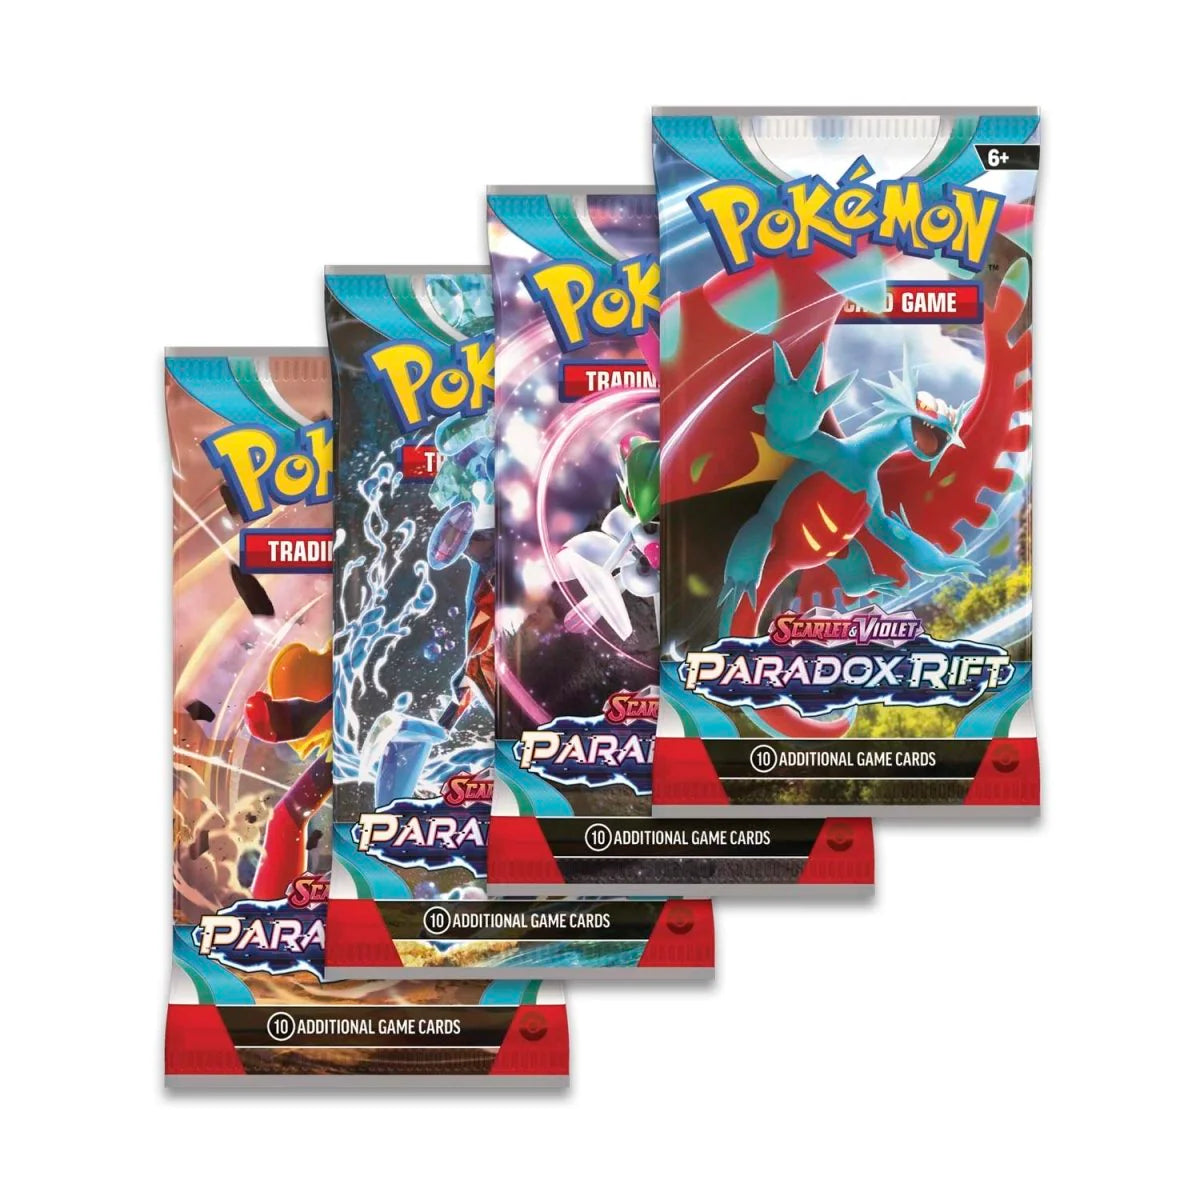 Pokémon Trading Card Game: Paradox Rift Booster Pack